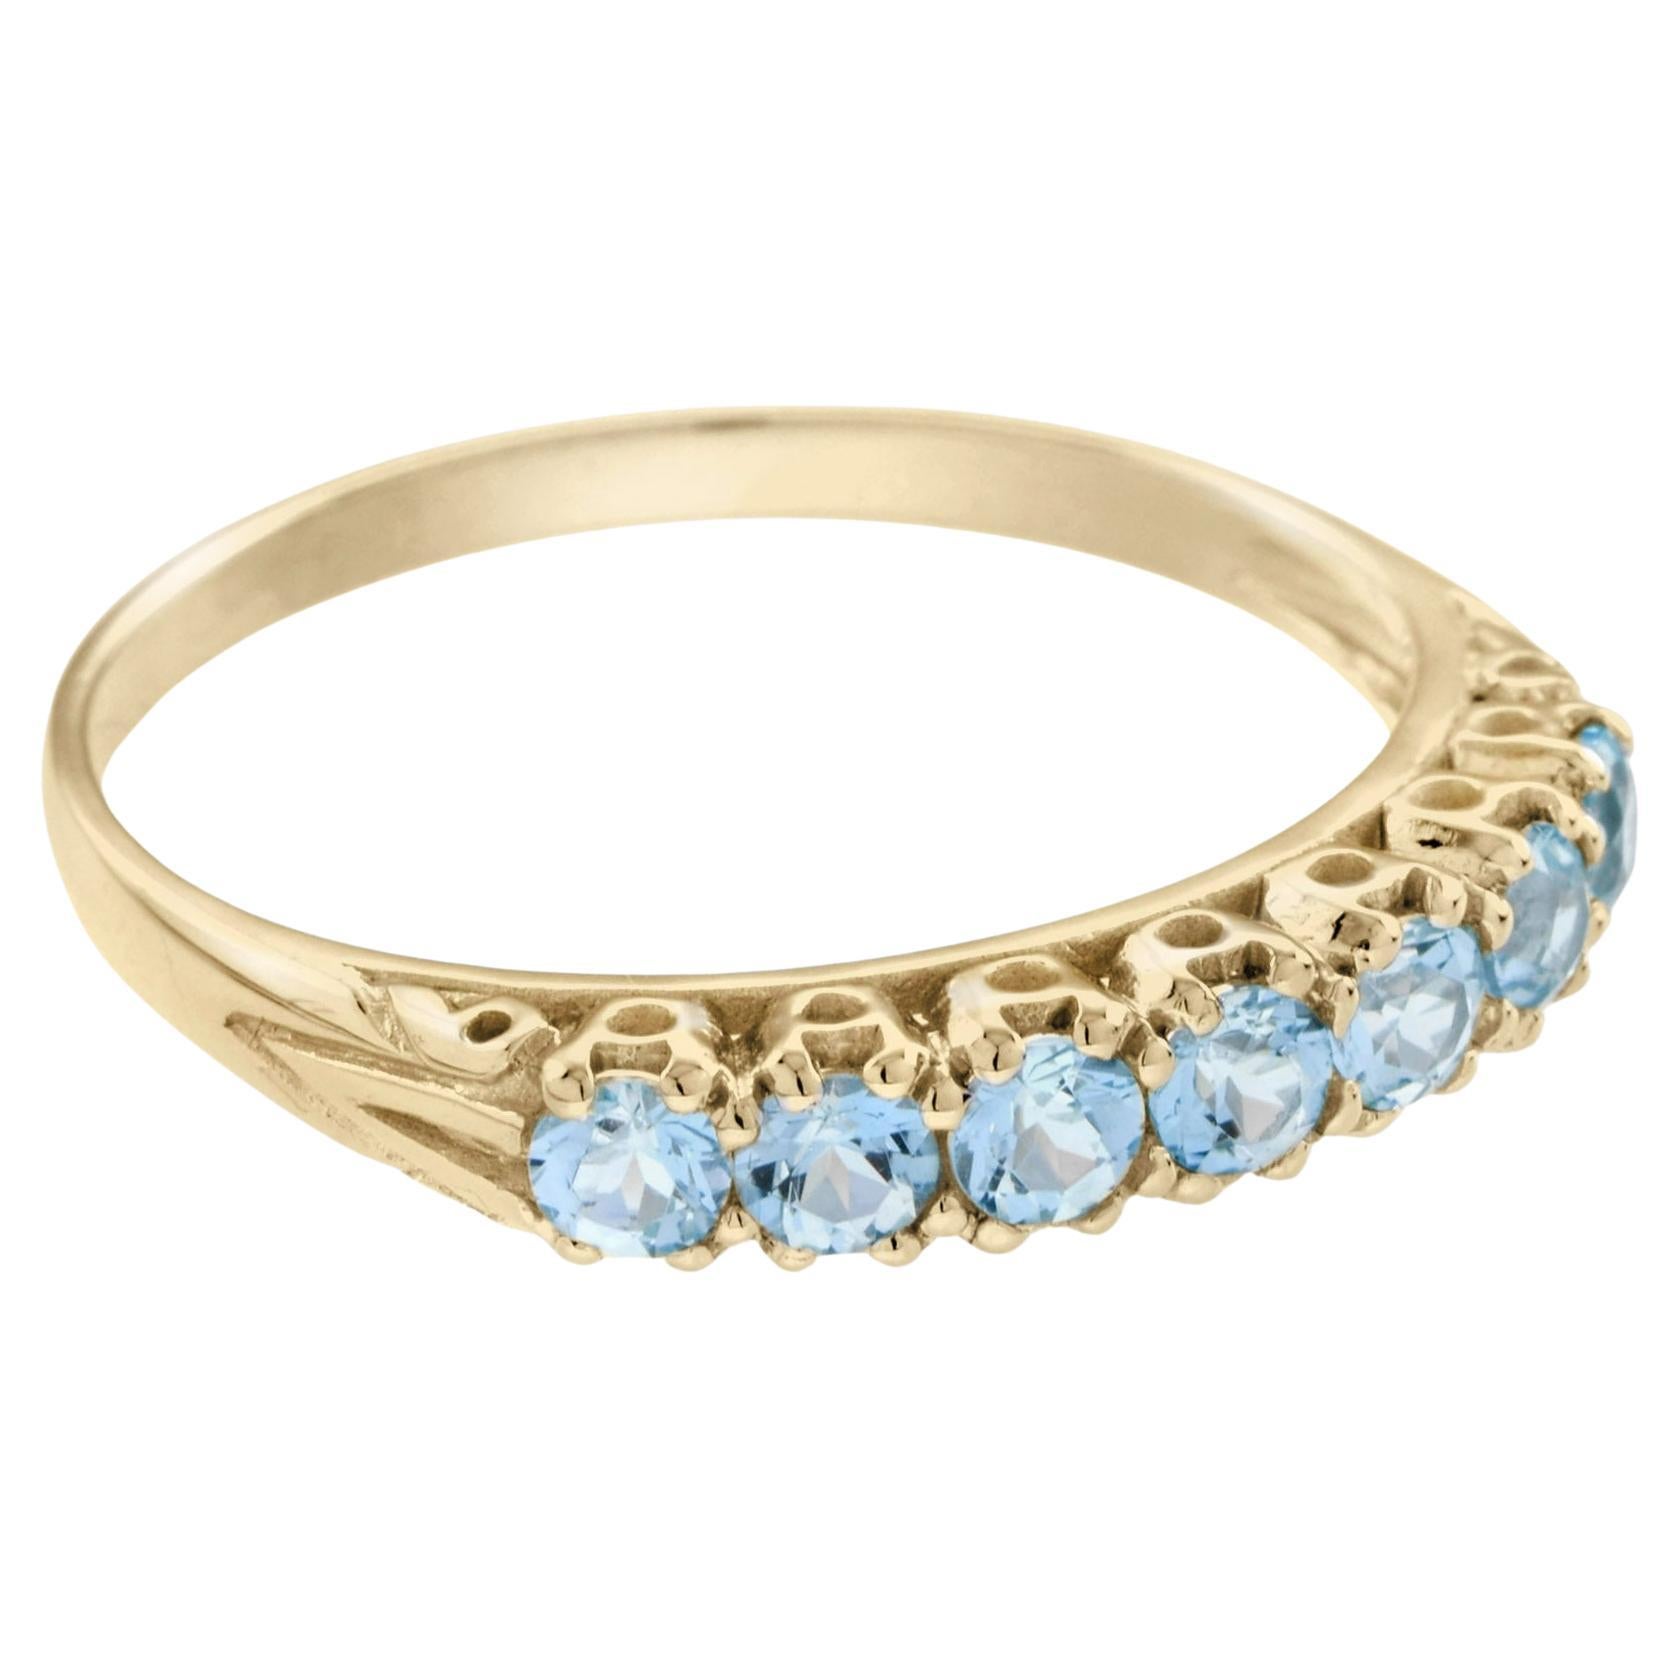 Blue Topaz Vintage Style Seven Stone Ring in 14K Yellow Gold